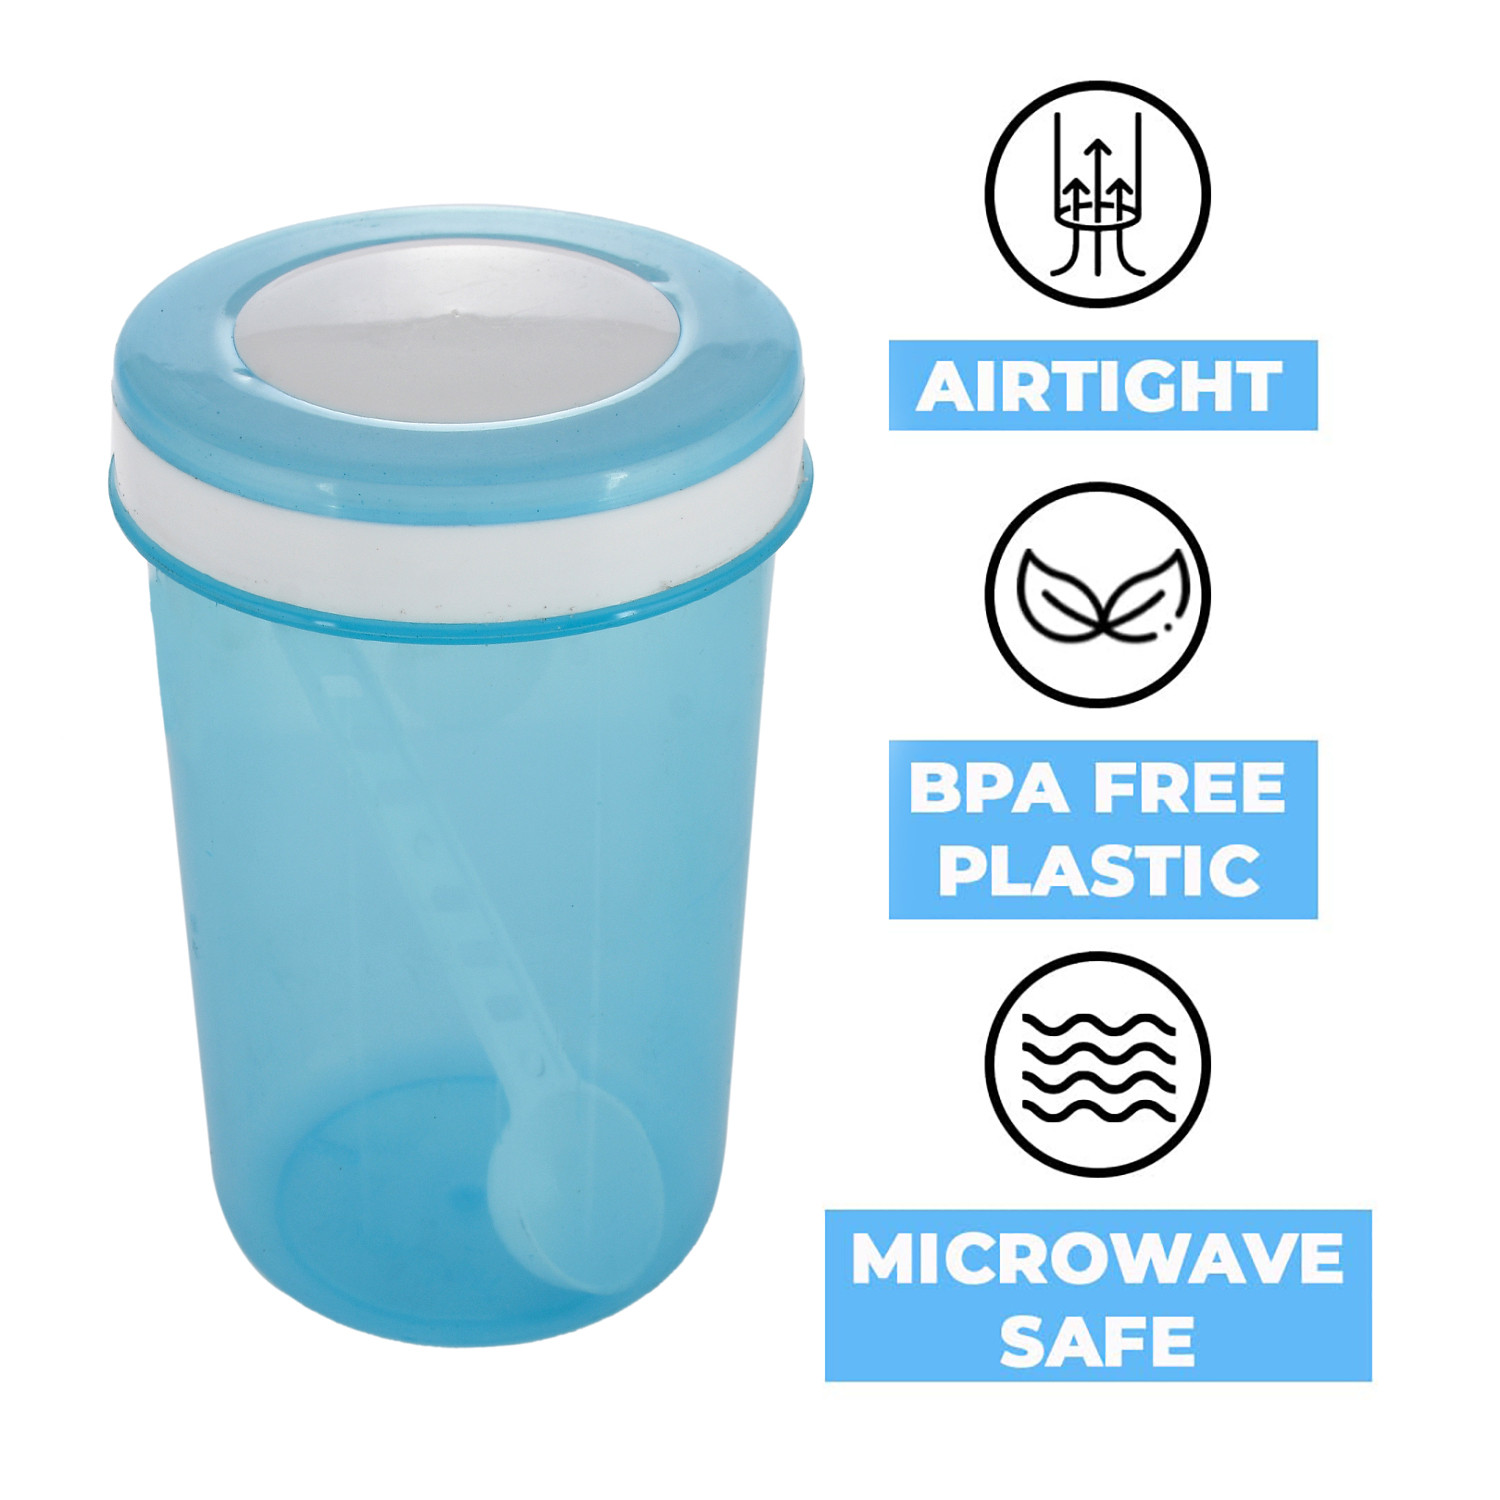 Kuber Industries Containers Set for Kitchen|BPA-Free Plastic Storage Containers Set|Kitchen Storage Containers|Grocery Containers with Spoon|SPICY 2000 ML| (Sky Blue)